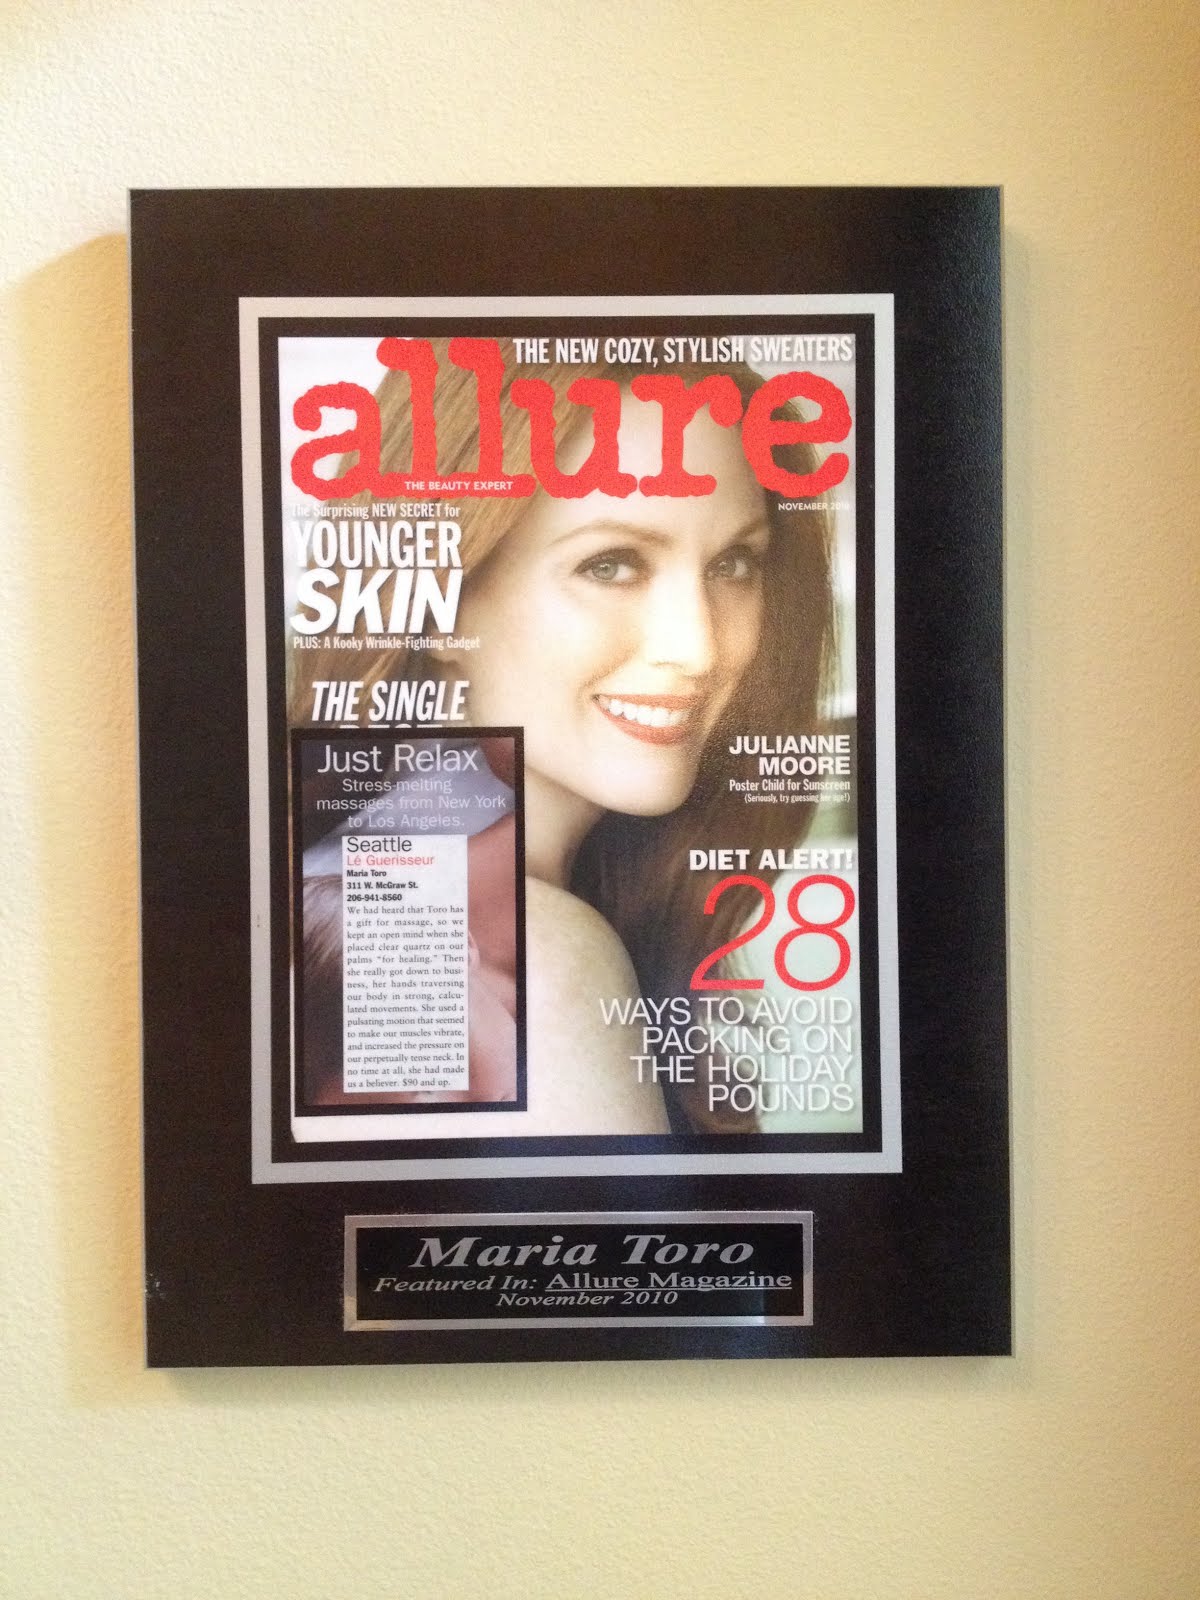 Allure voted me "Best in Seattle".